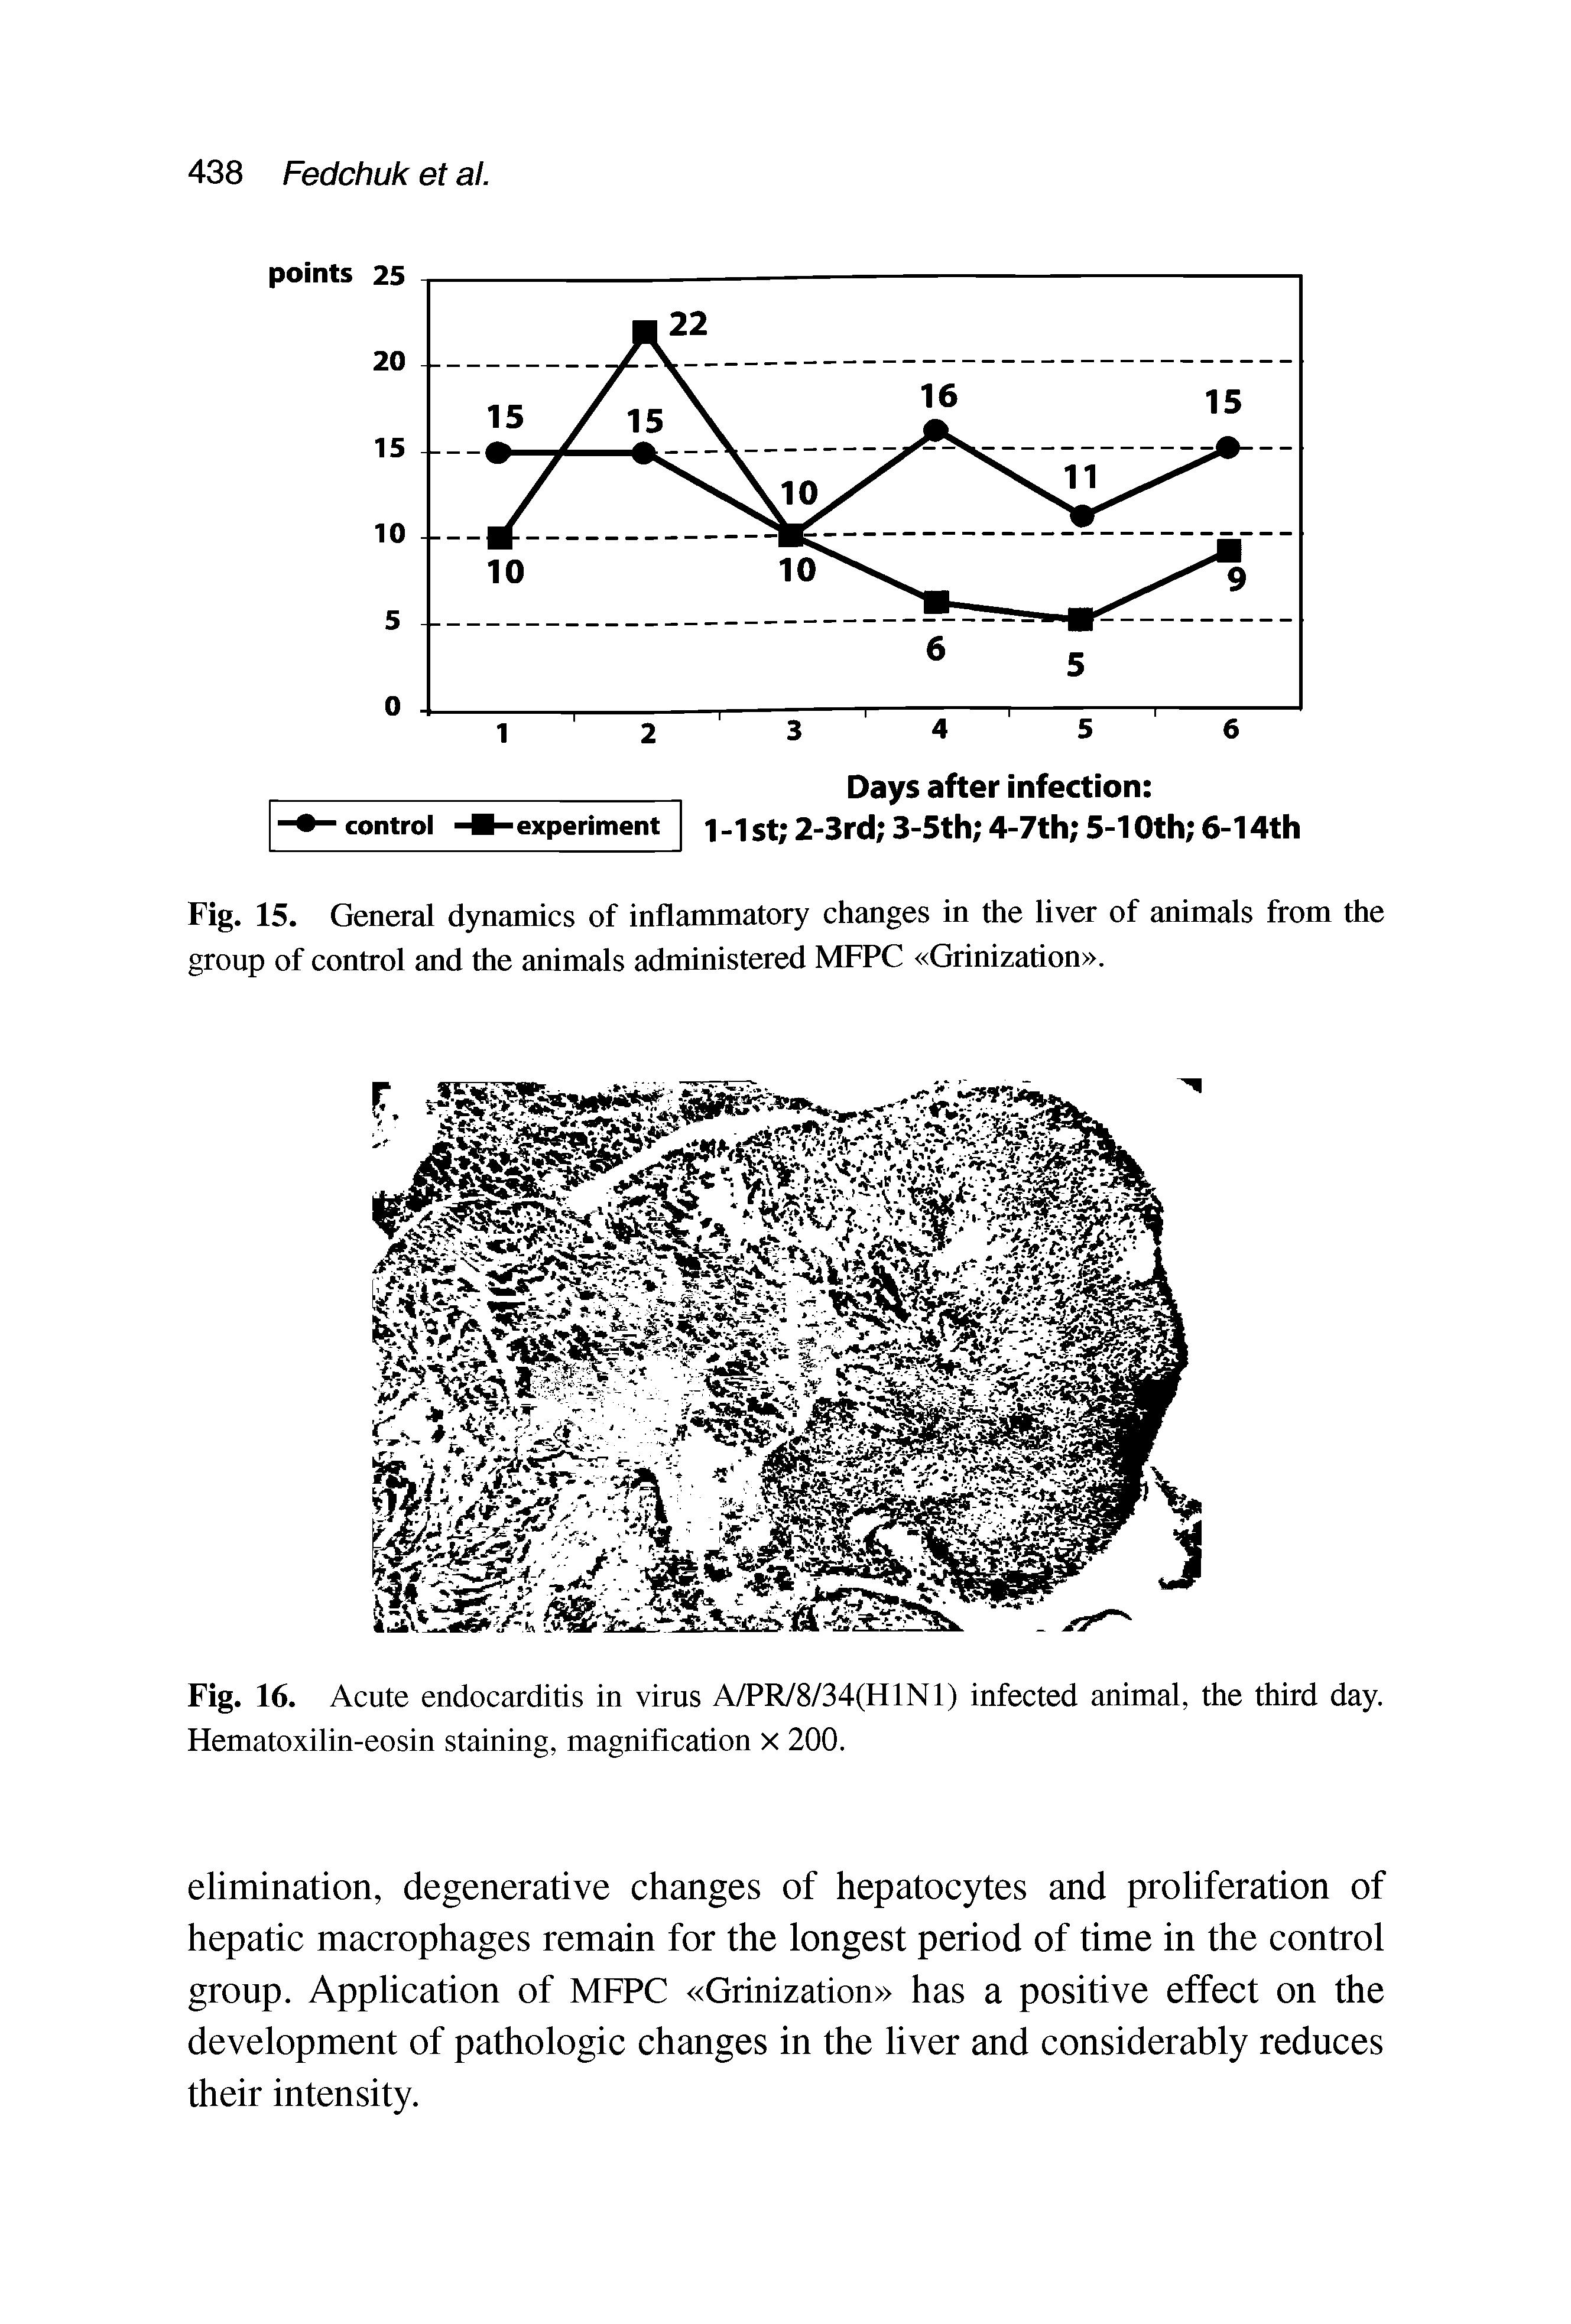 Fig. 15. General dynamics of inflammatory changes in the liver of animals from the group of control and the animals administered MFPC Grinization .